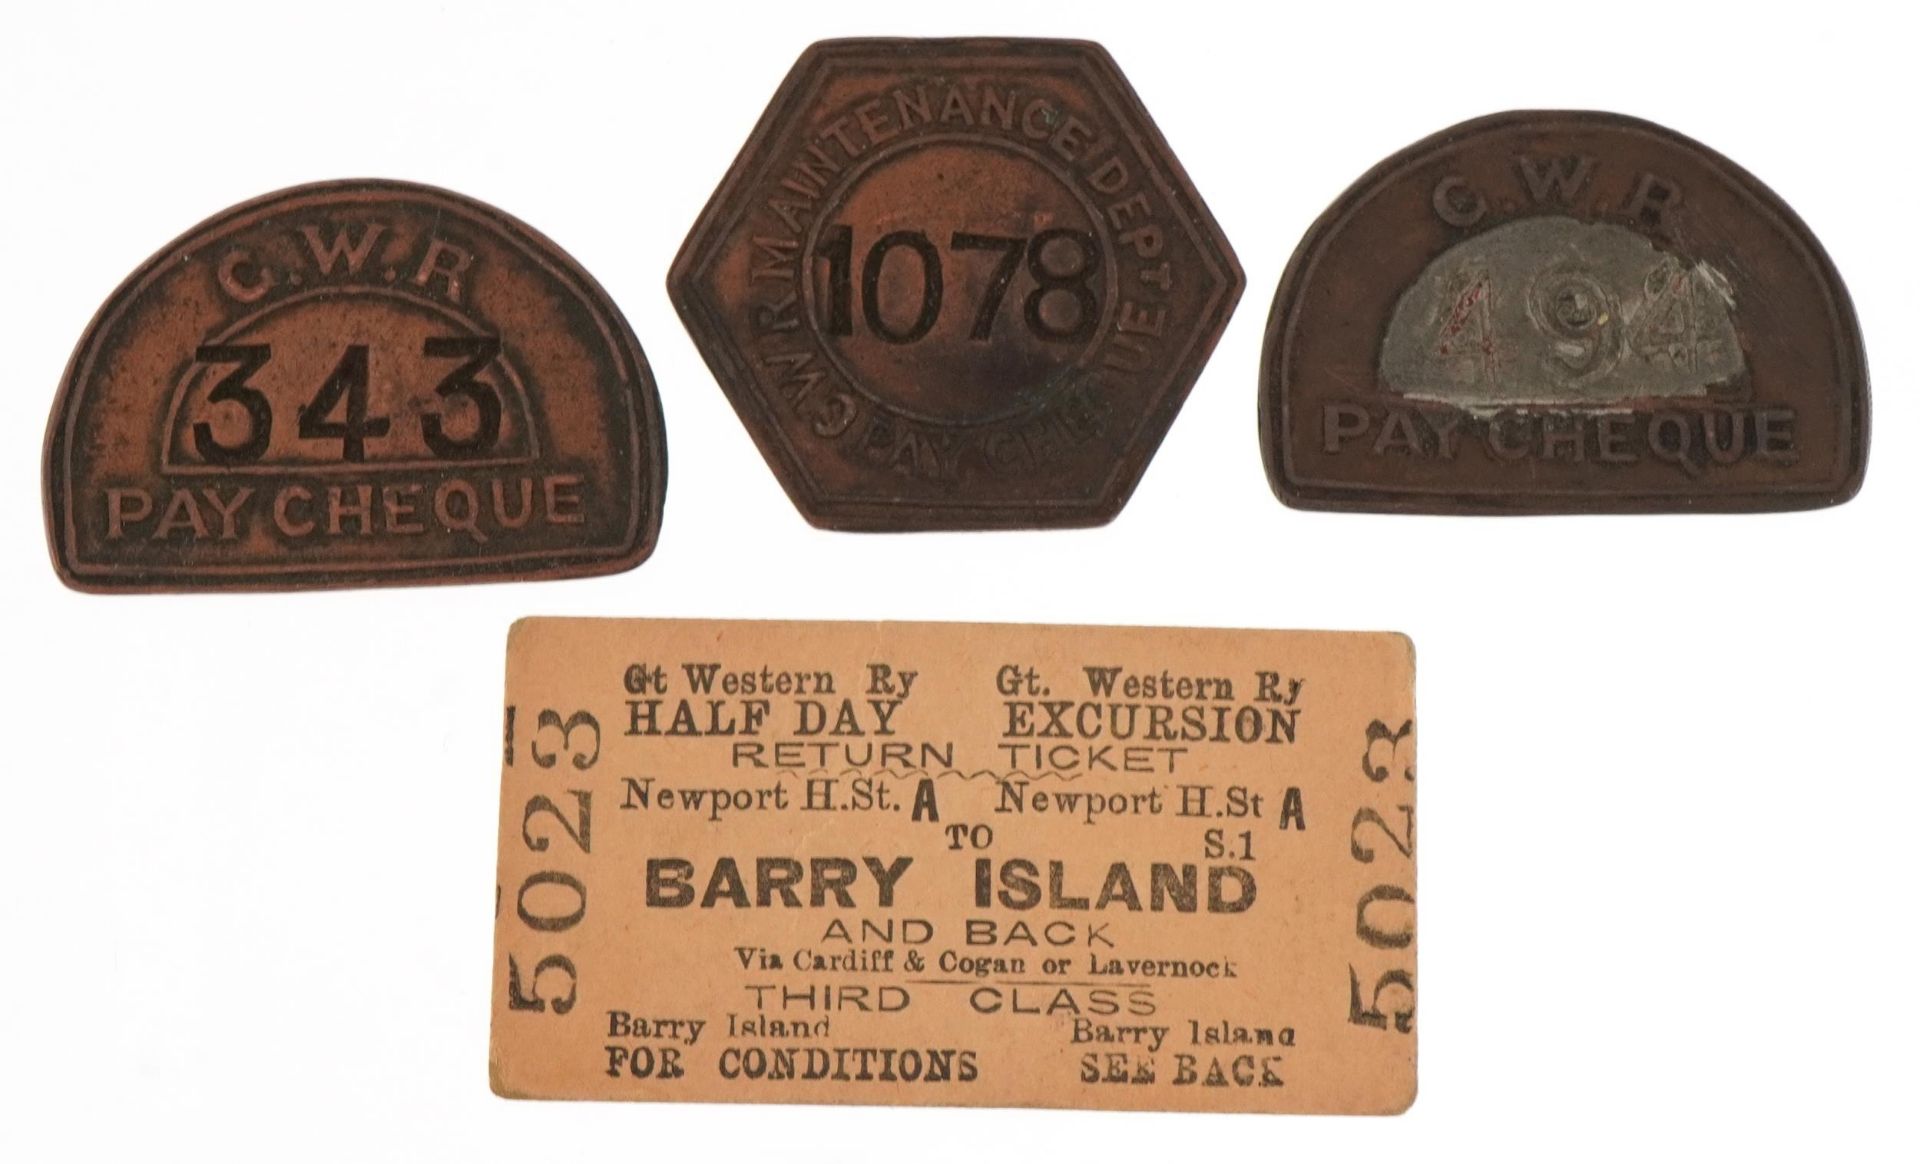 Three Great Western railway metal pay cheques and a return ticket to Barry Island : For further